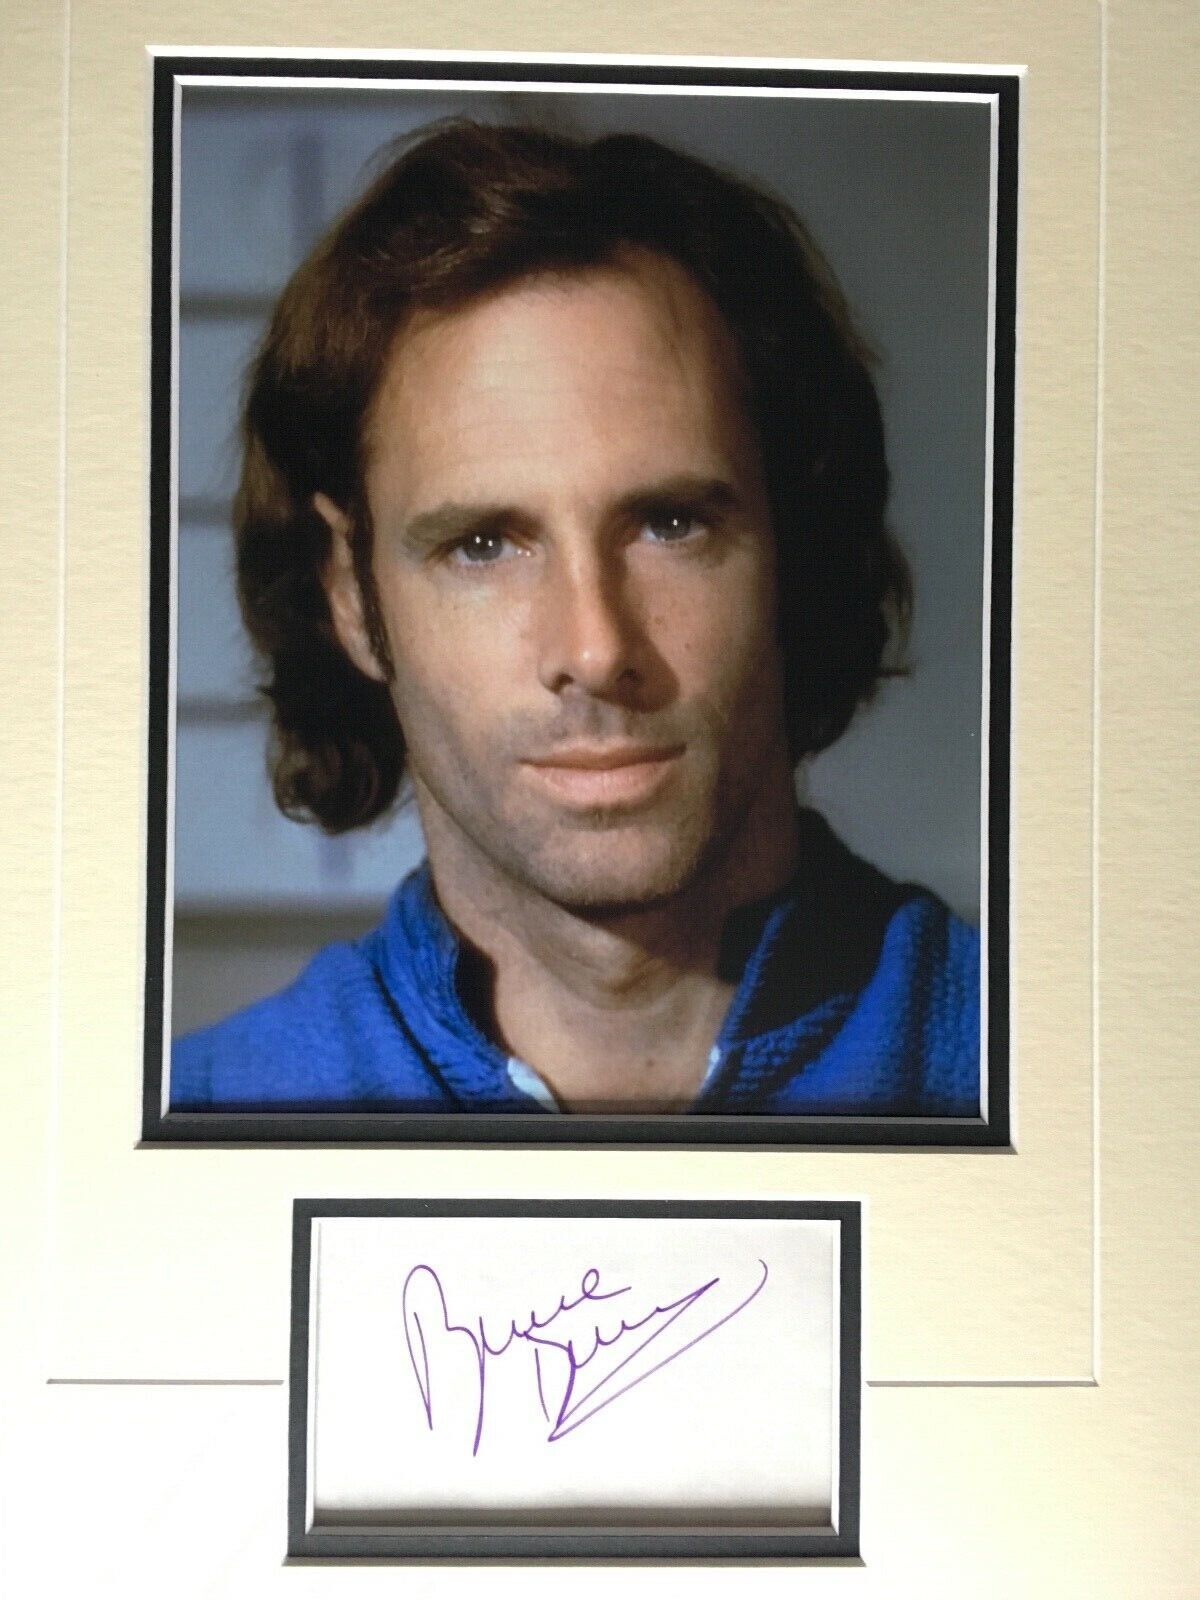 BRUCE DERN - POPULAR AMERICAN ACTOR - SUPERB SIGNED Photo Poster painting DISPLAY